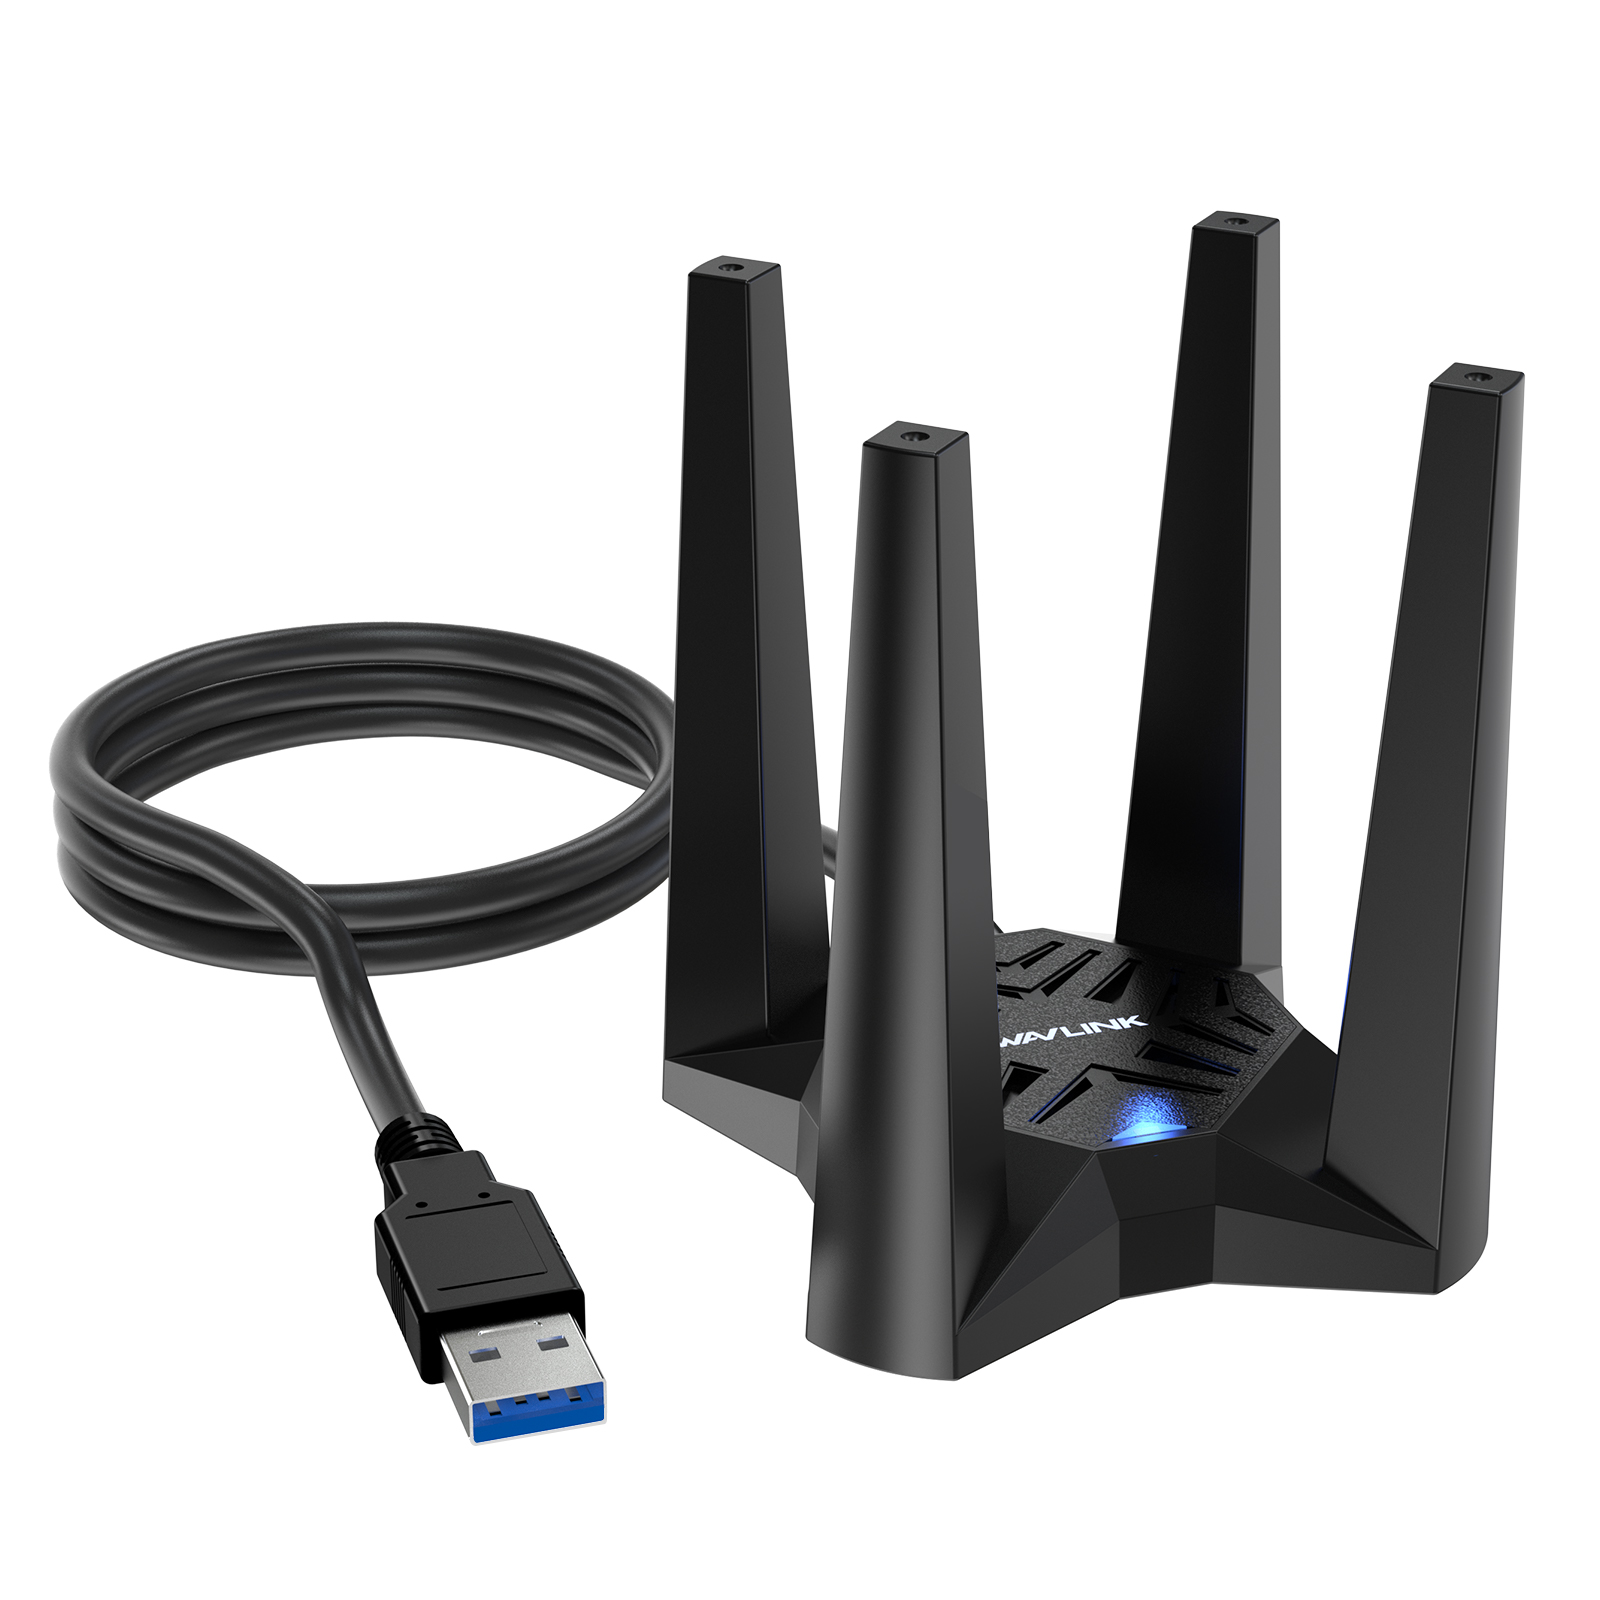 Wireless AC1200 Dual Band USB 3.0 Adapter Philippines